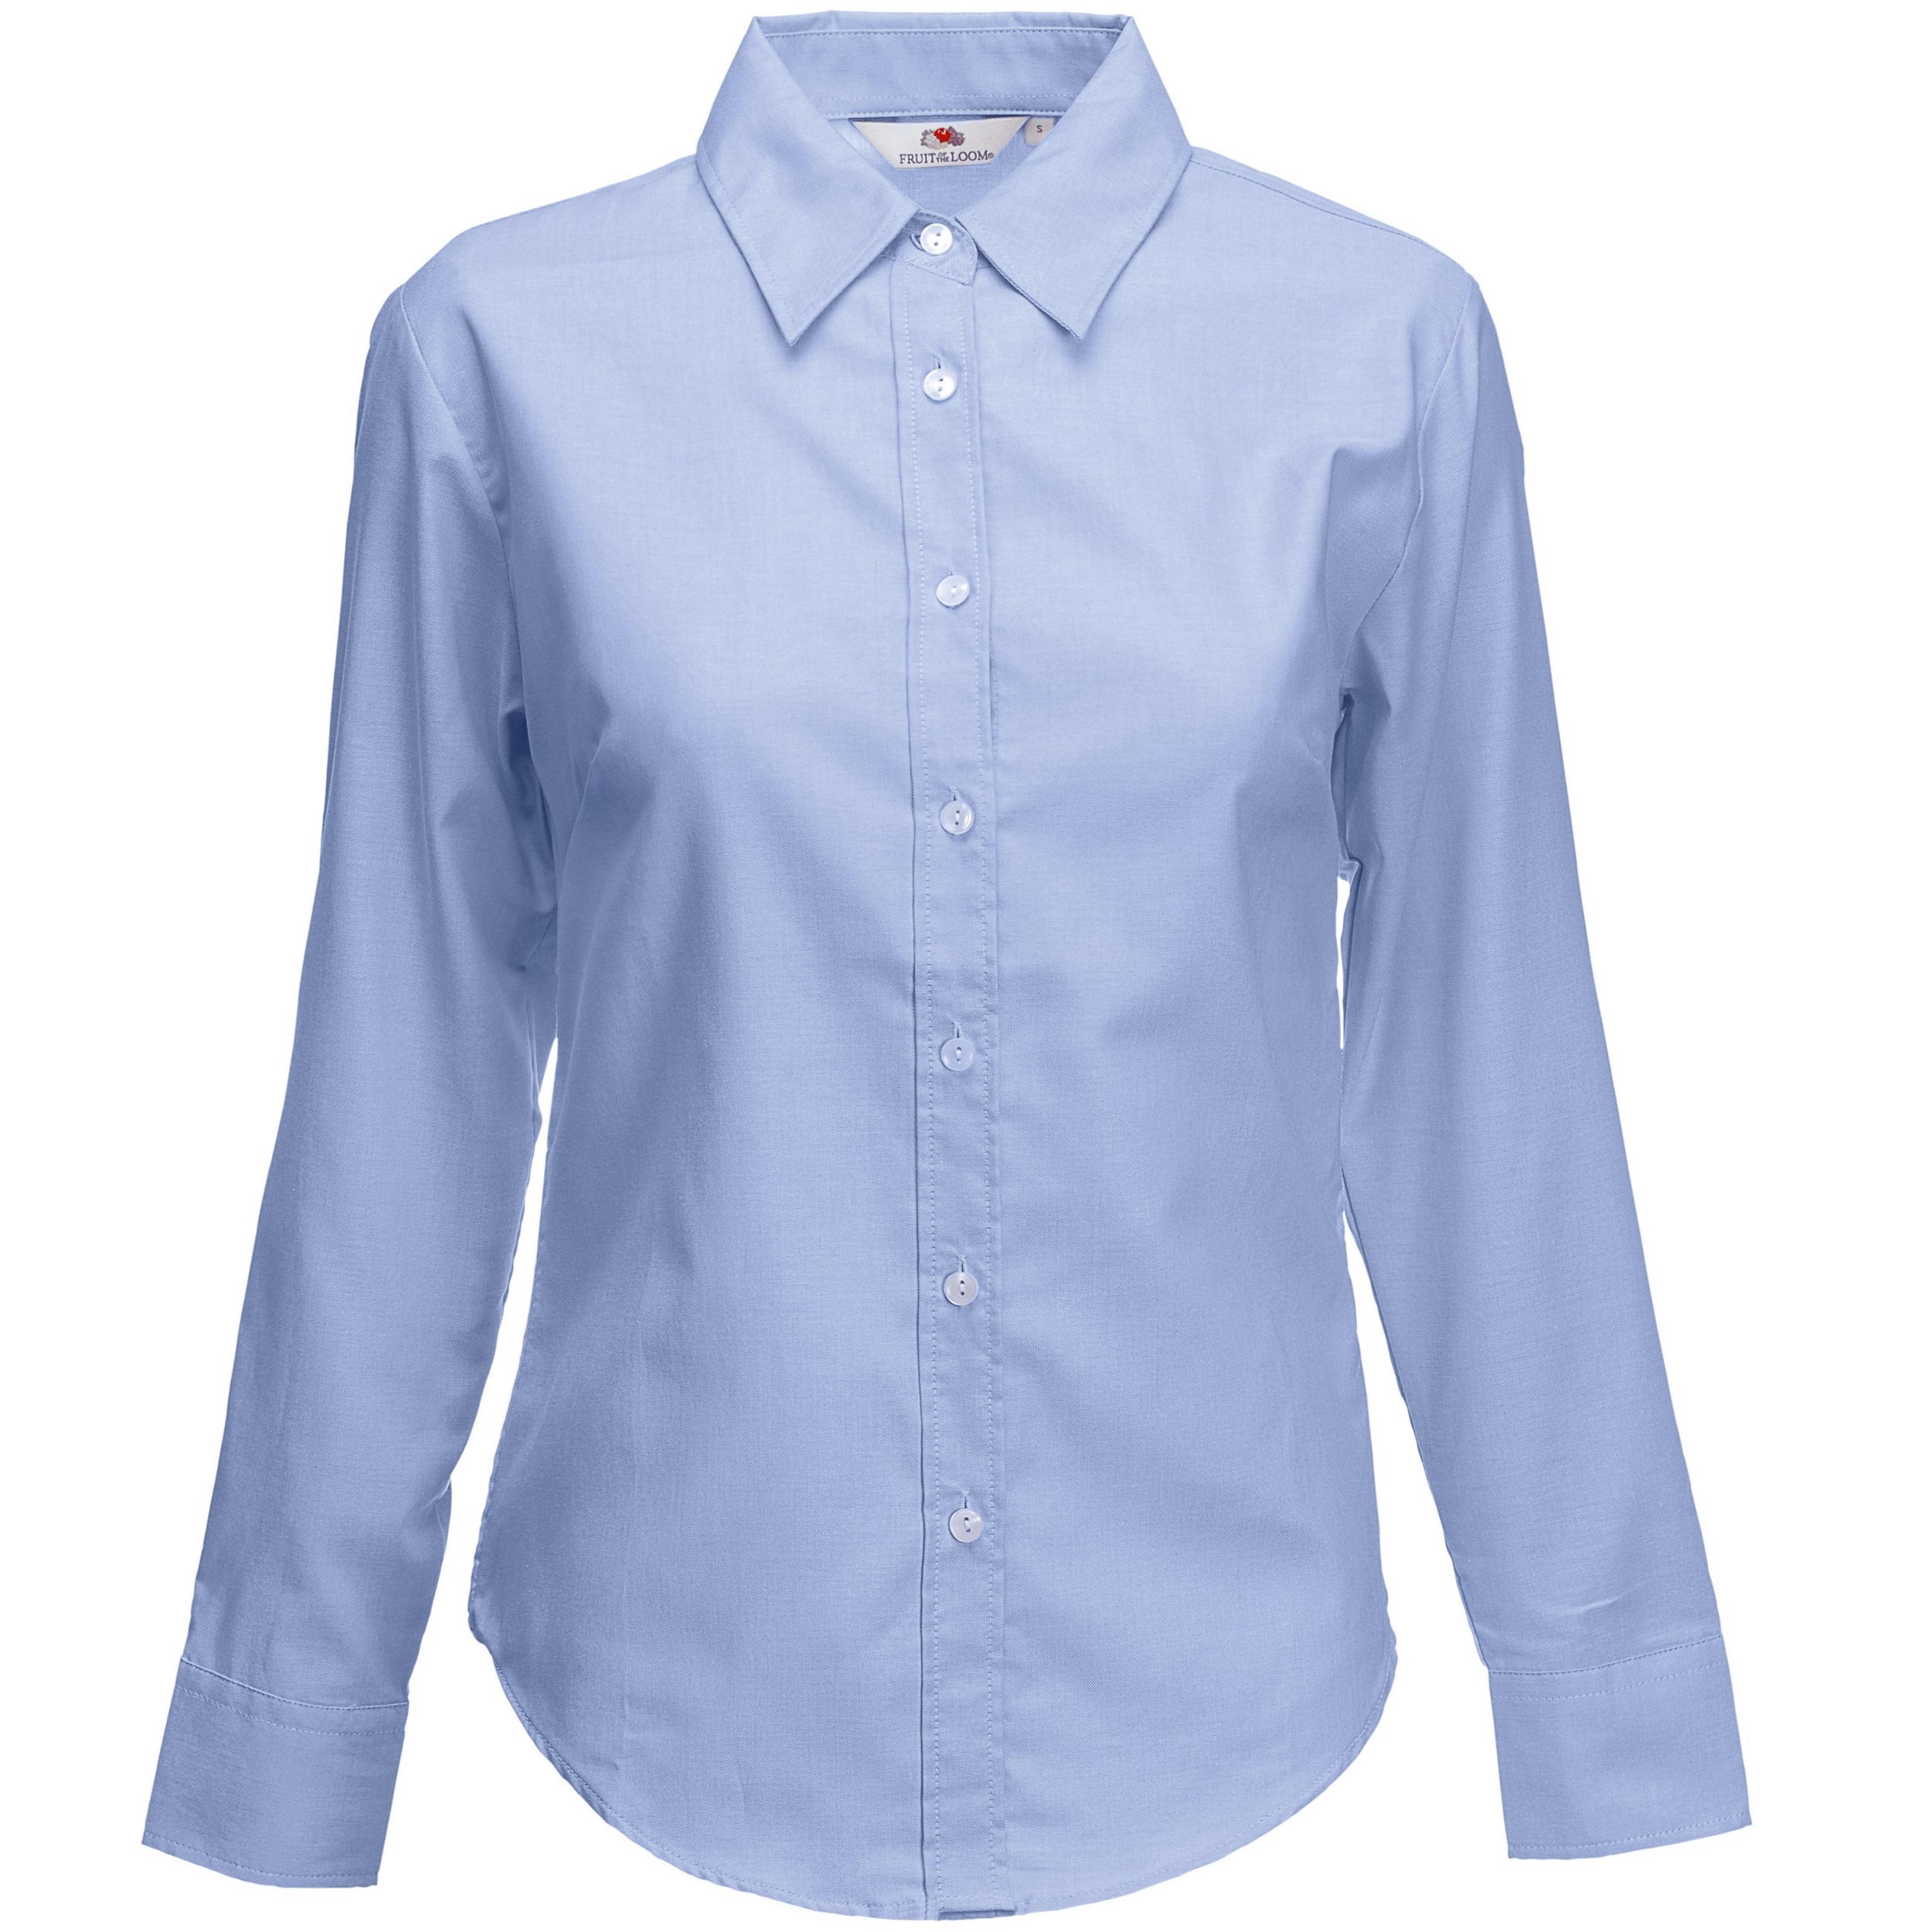 Fruit of the Loom SS001 Women's Oxford Long Sleeve Shirt-0